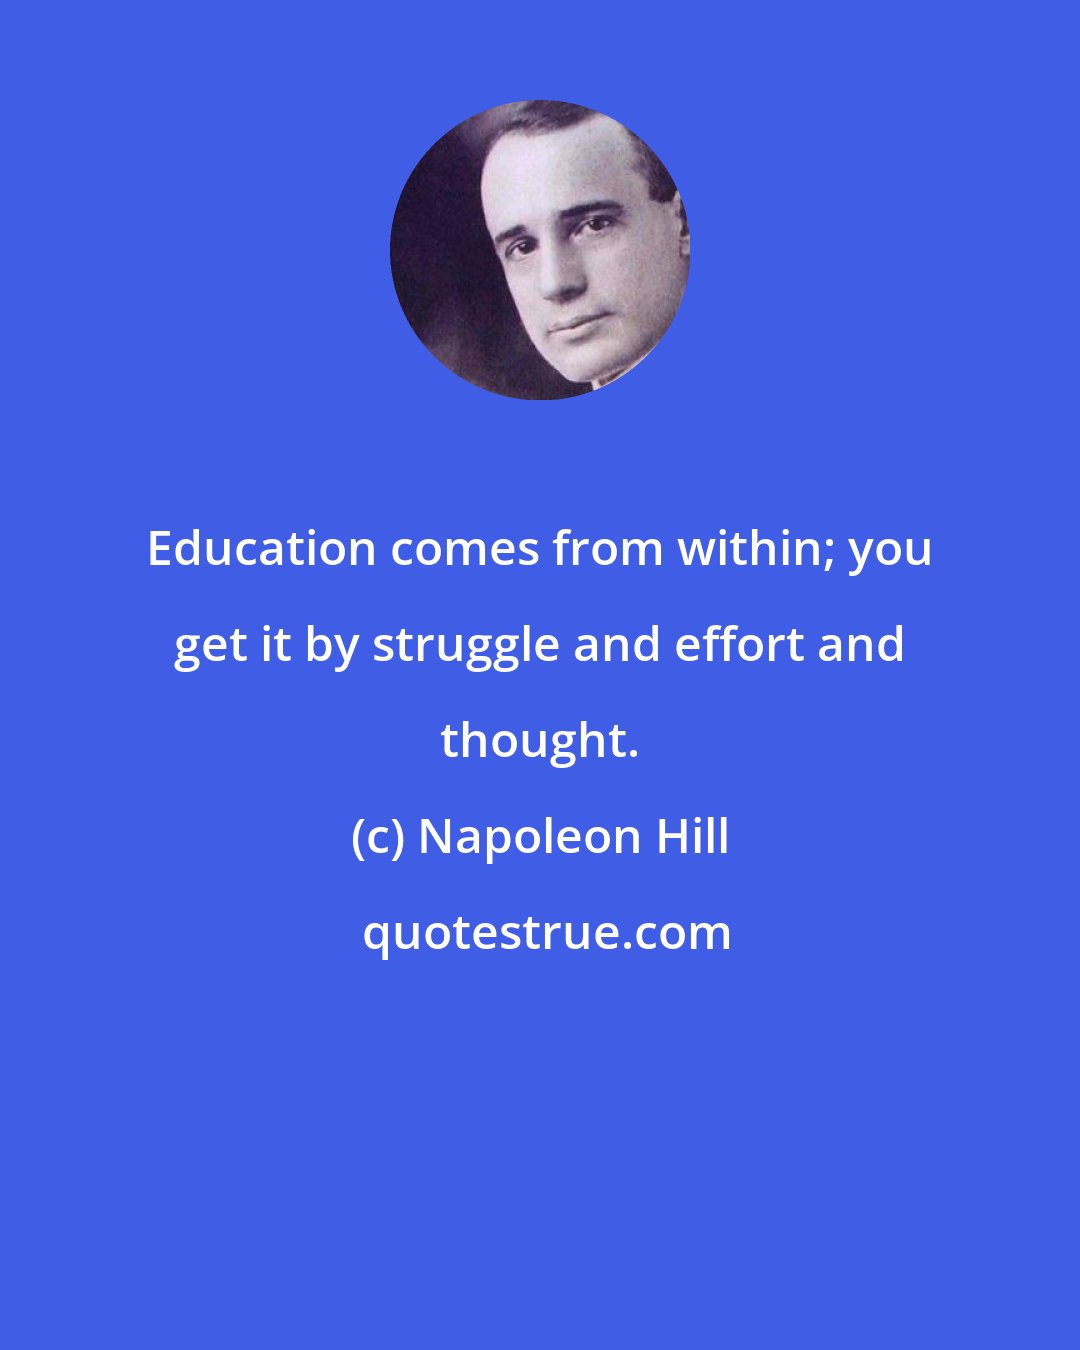 Napoleon Hill: Education comes from within; you get it by struggle and effort and thought.